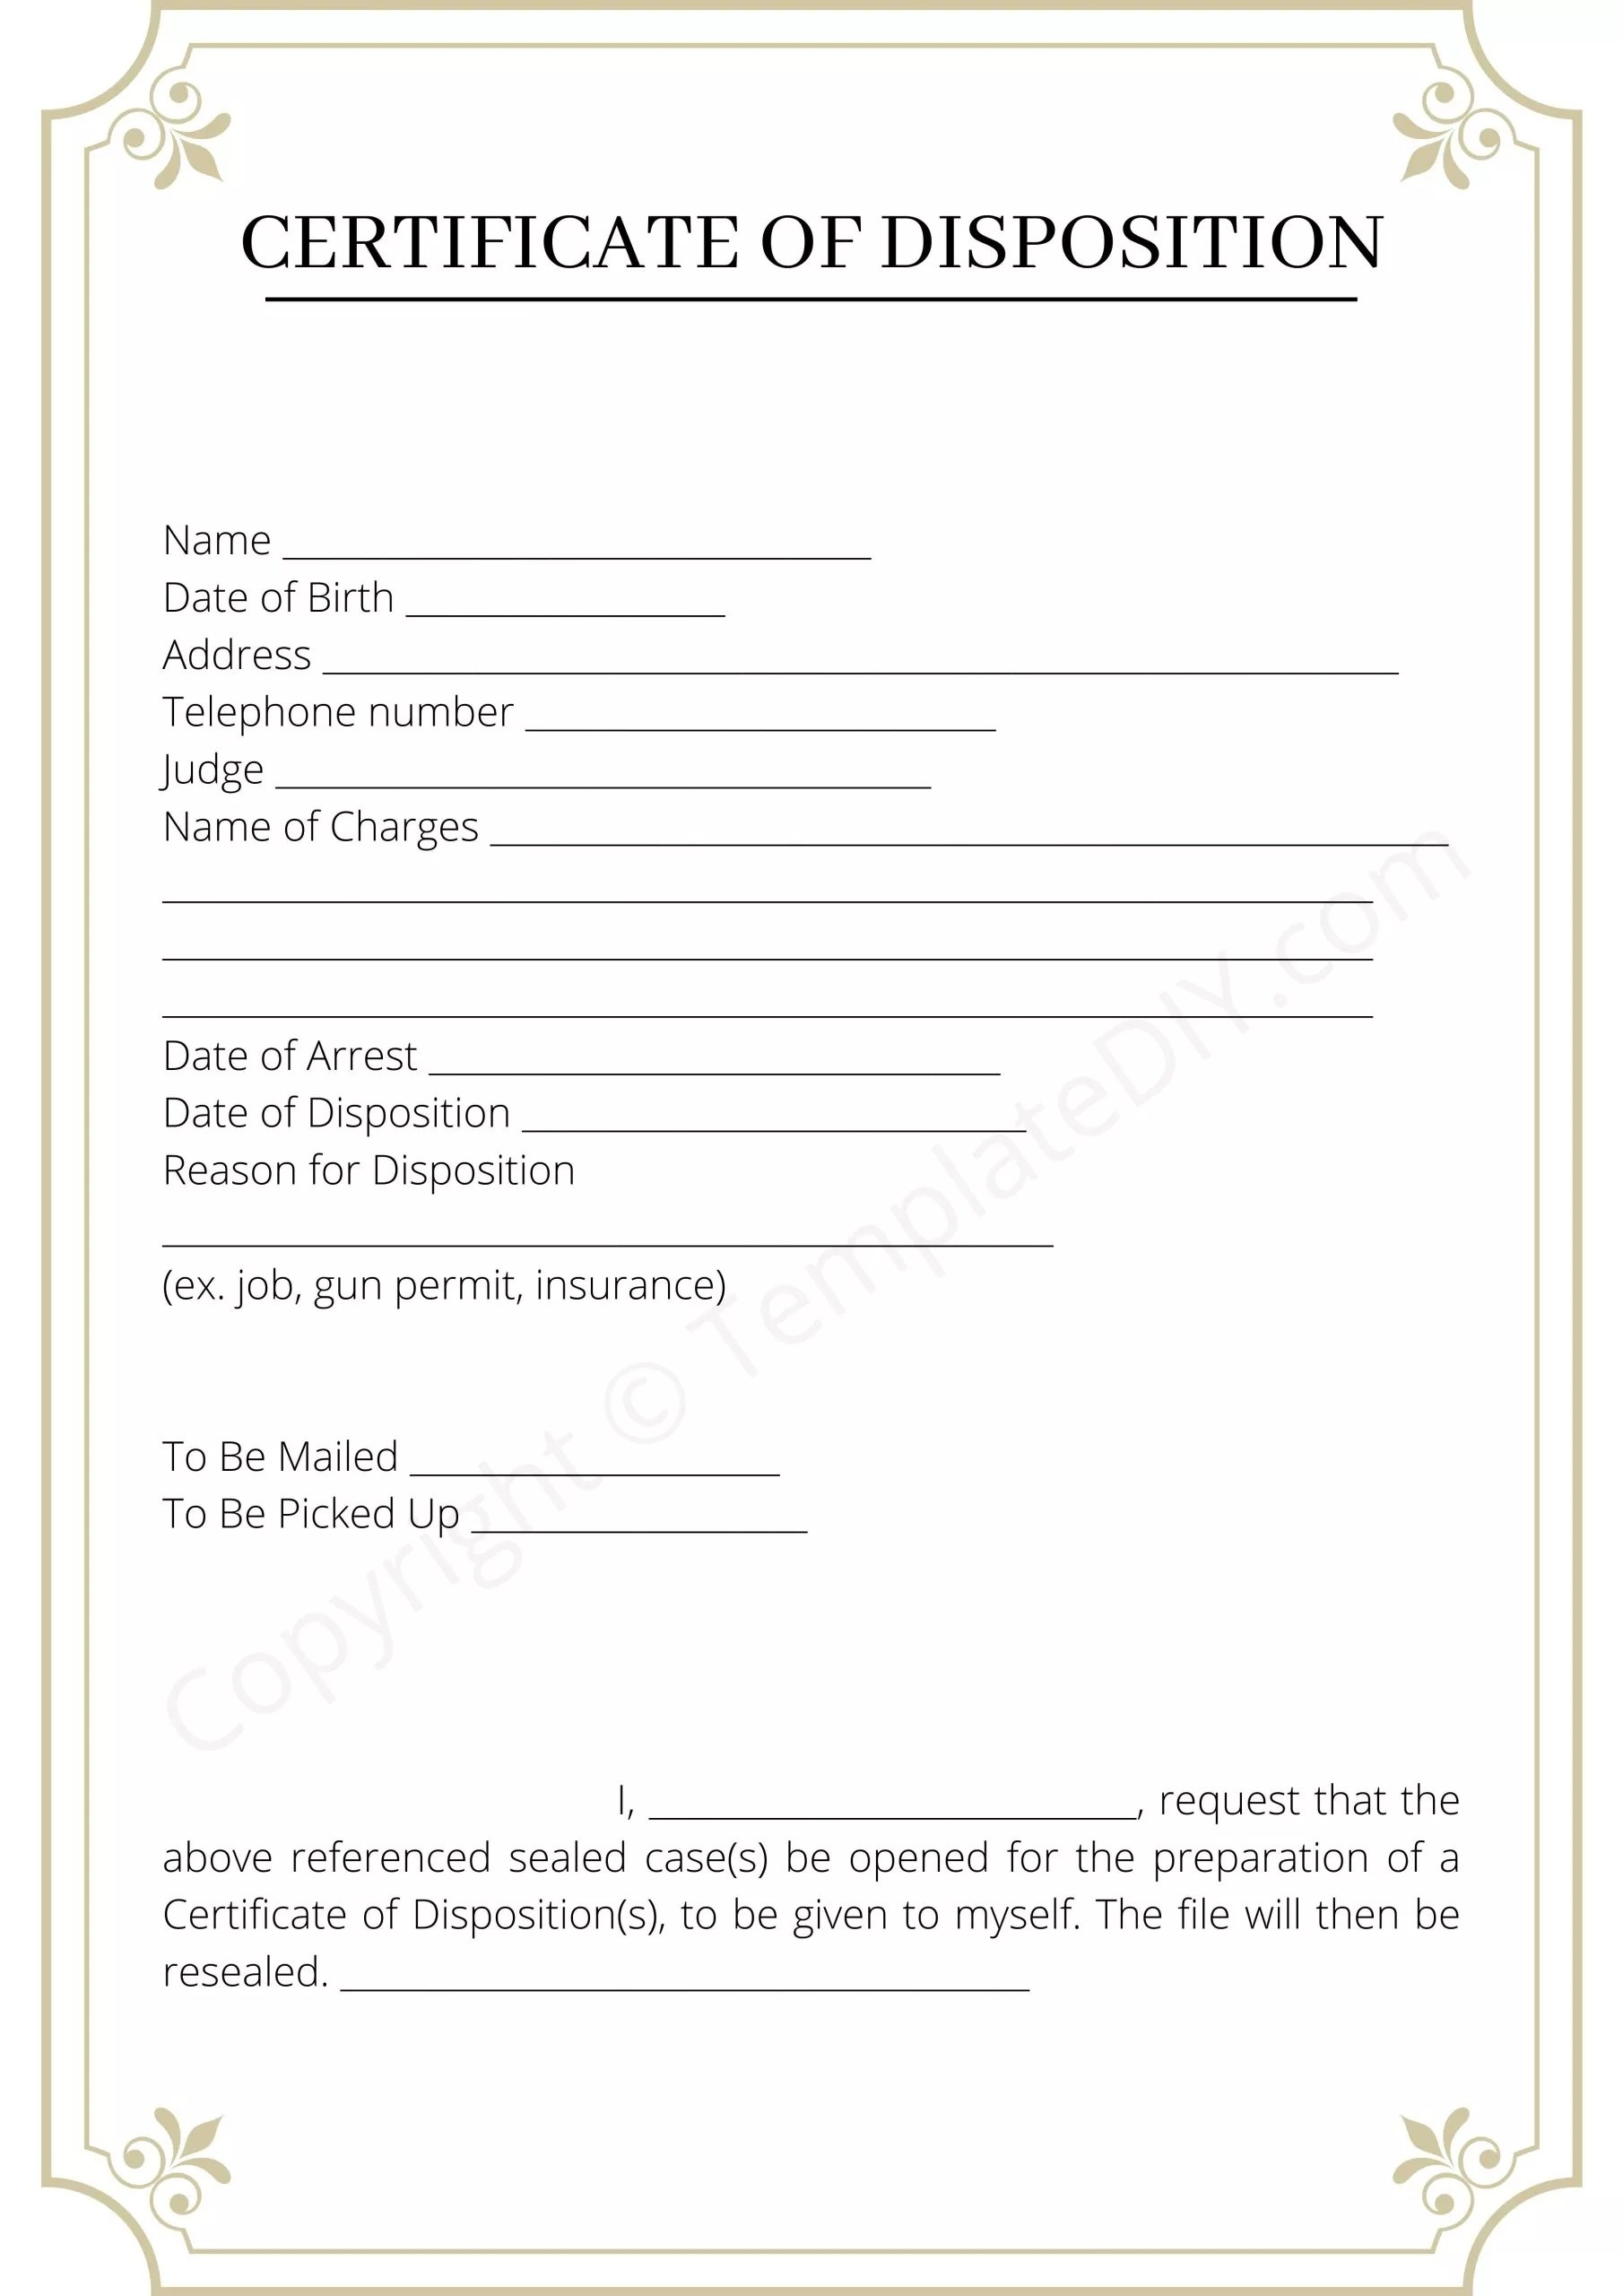 Certificate of Disposition Blank Printable Template in PDF & Word Throughout Blank Legal Document Template